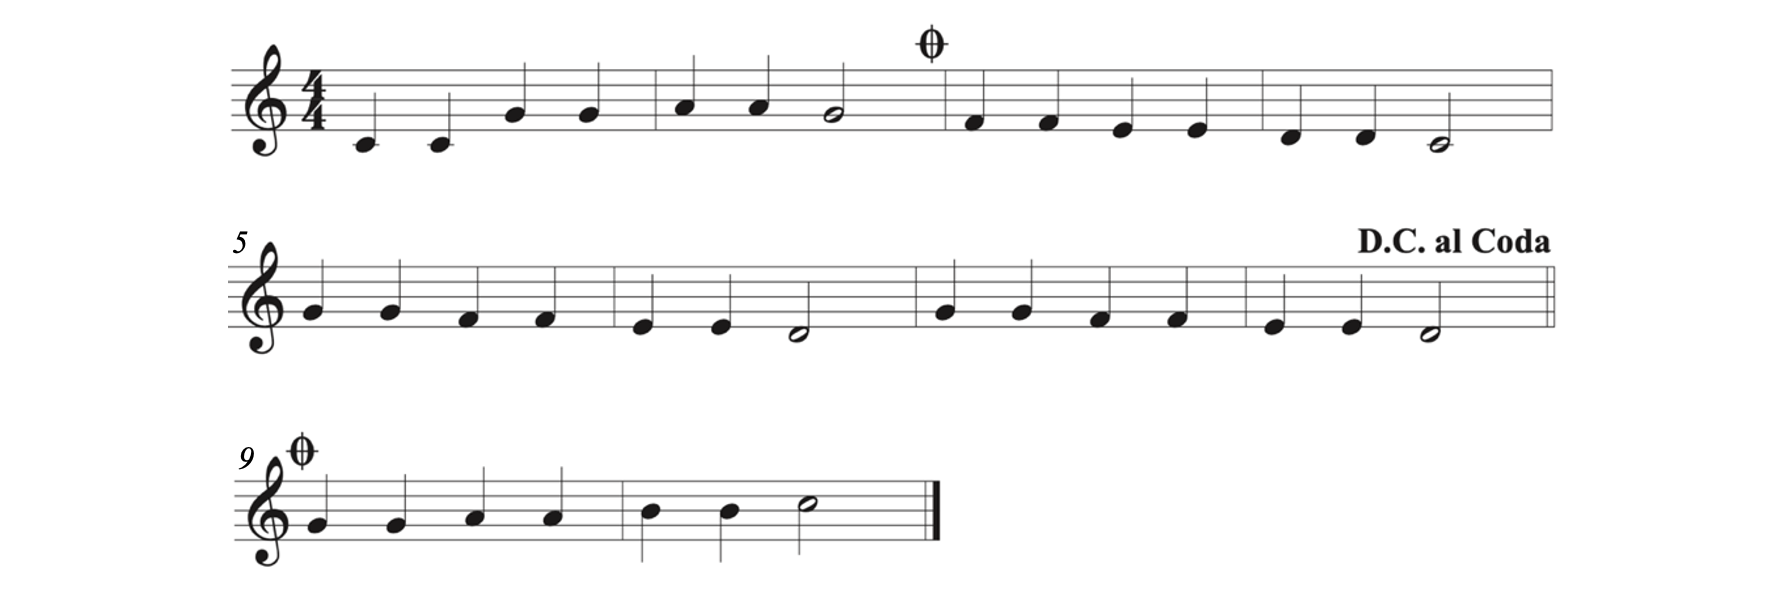 Twinkle Twinkle Little Star with D.C. al Coda at the end of measure 8. The coda sign is at the end of measure 2. The second coda sign is at the start of measure 9.